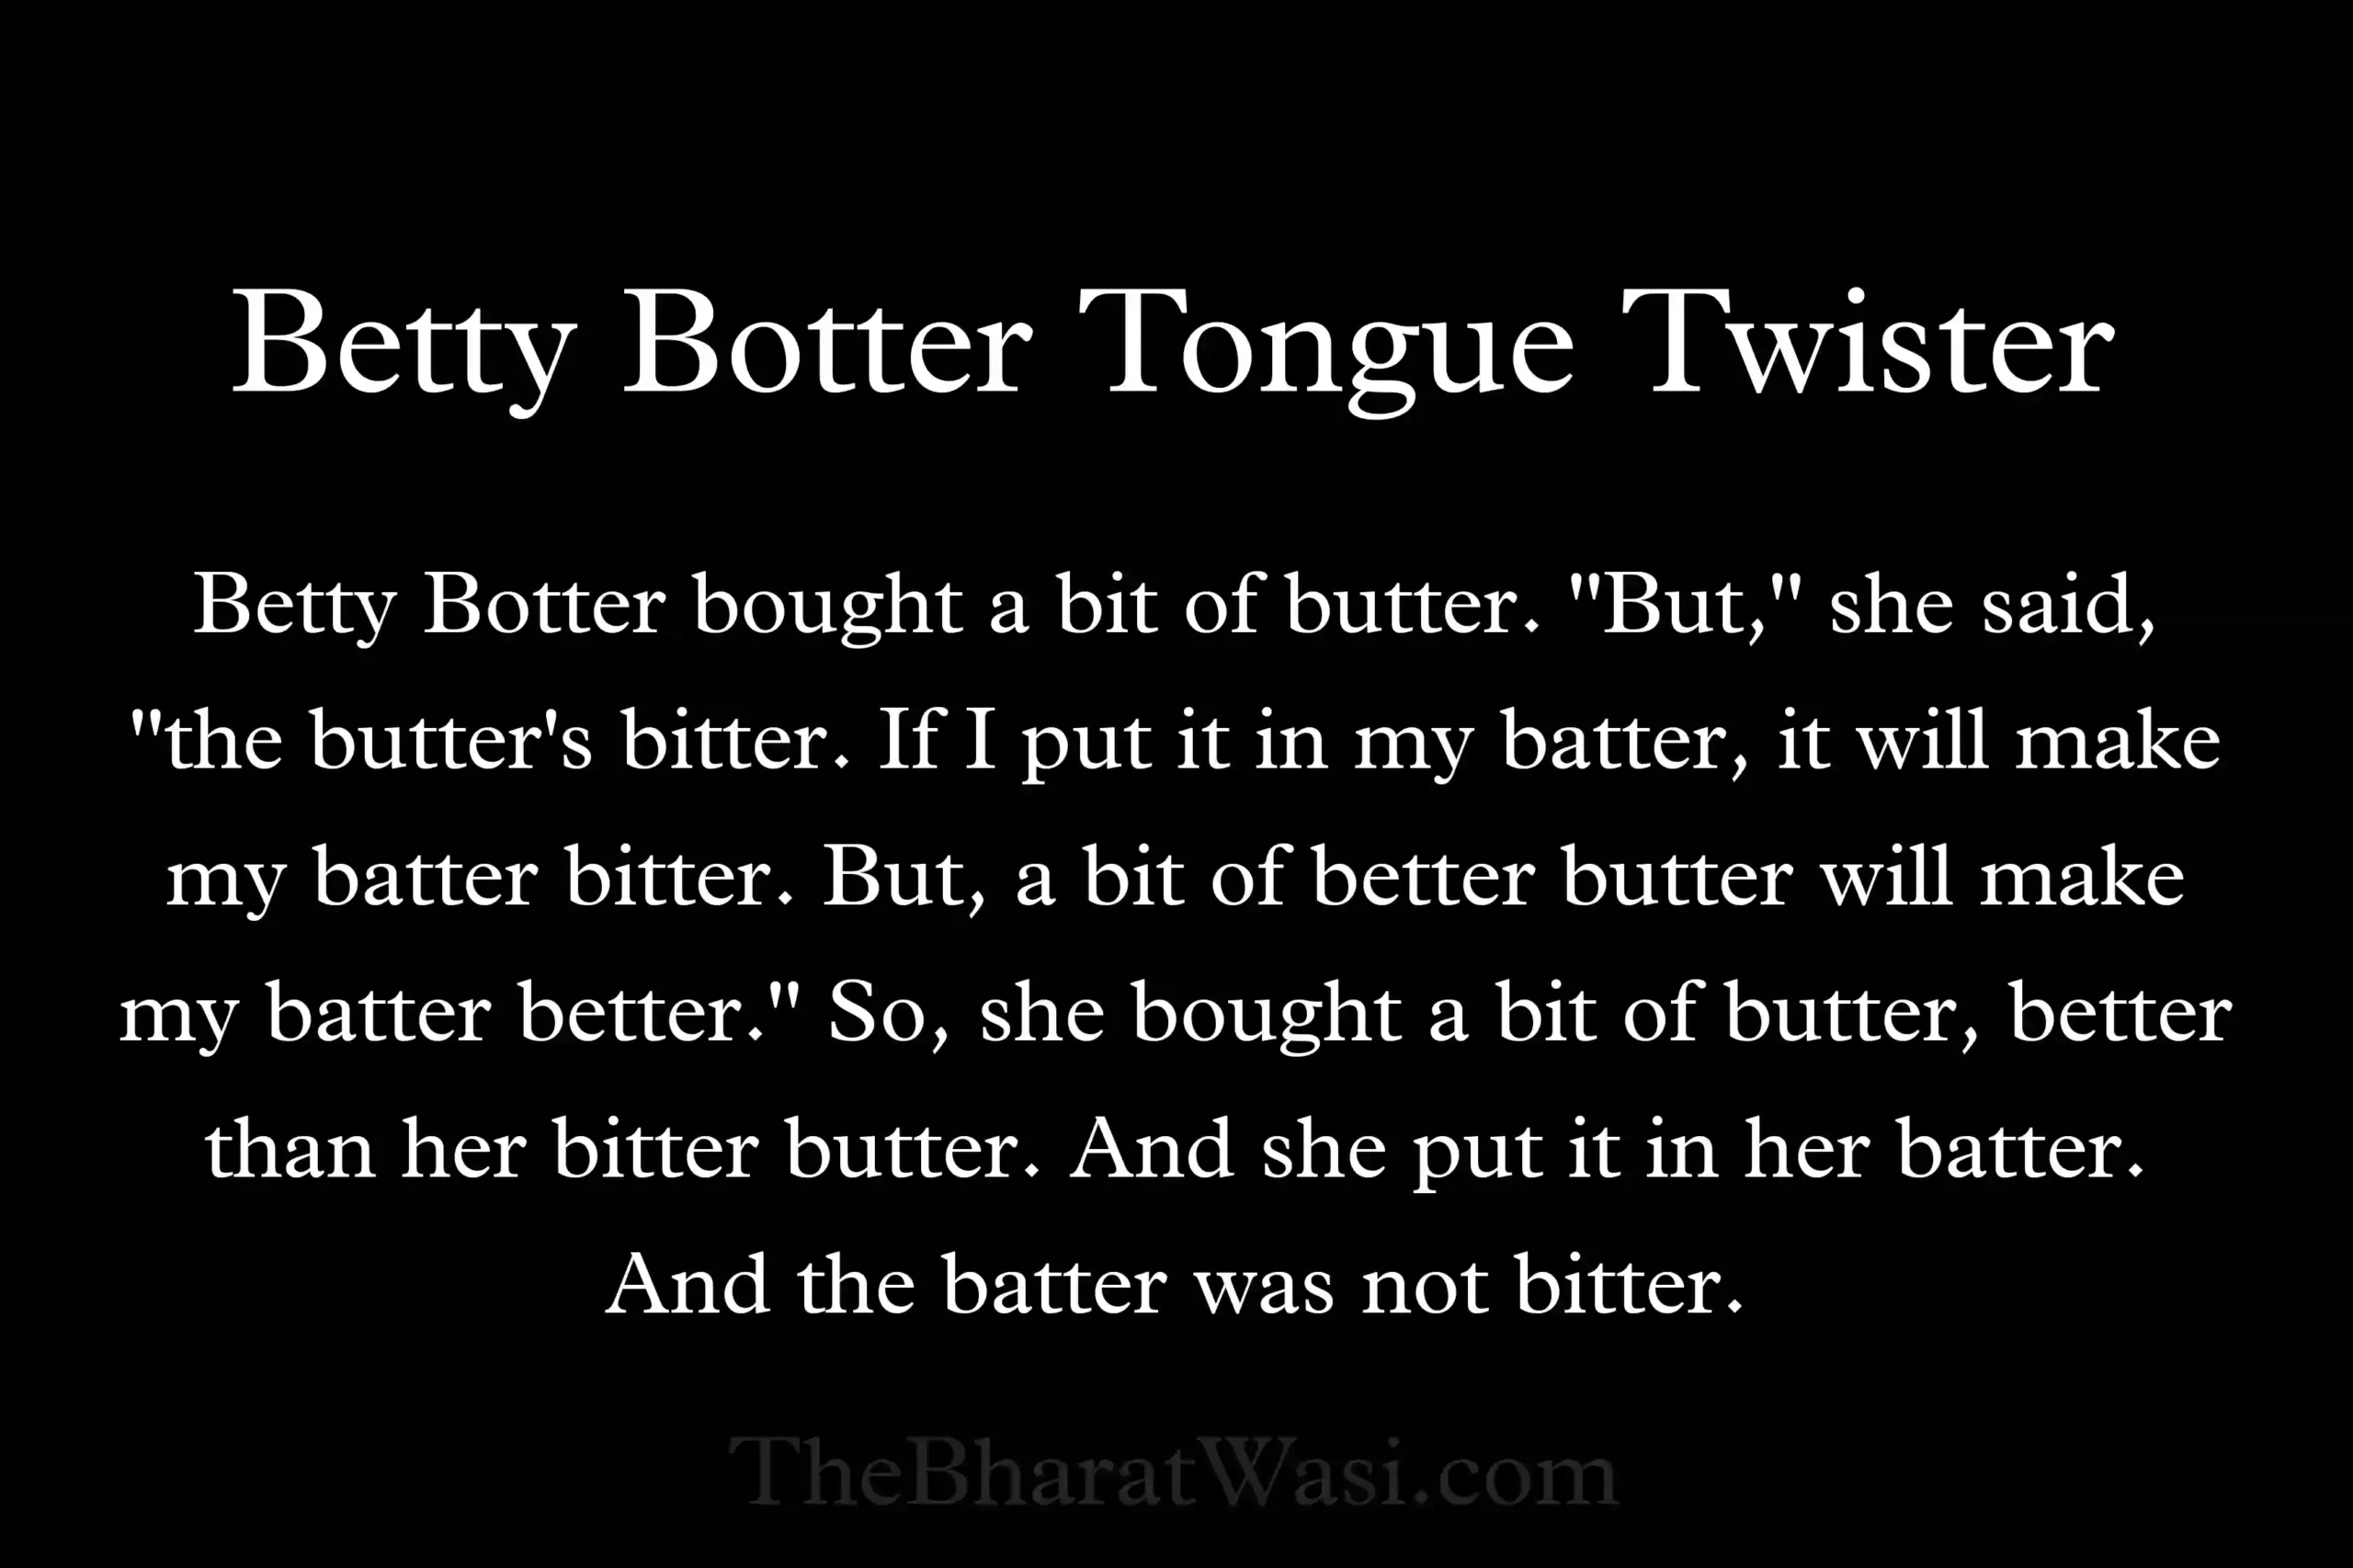 Betty butter tongue twister